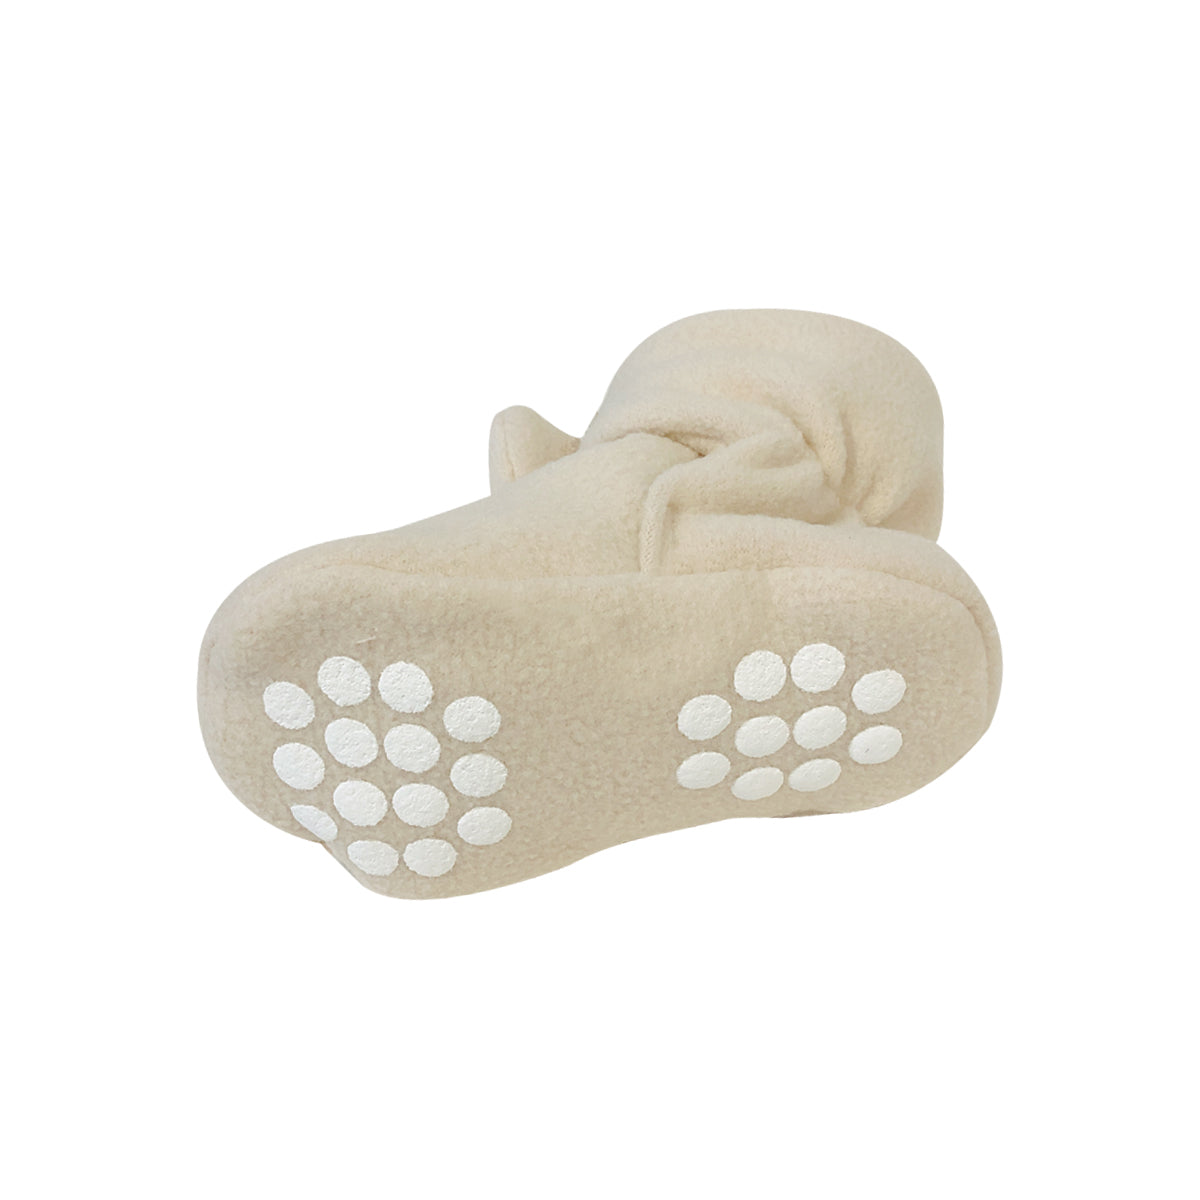 WrapablesÂ® Fleece Baby Booties with Anti-Skid Bottoms